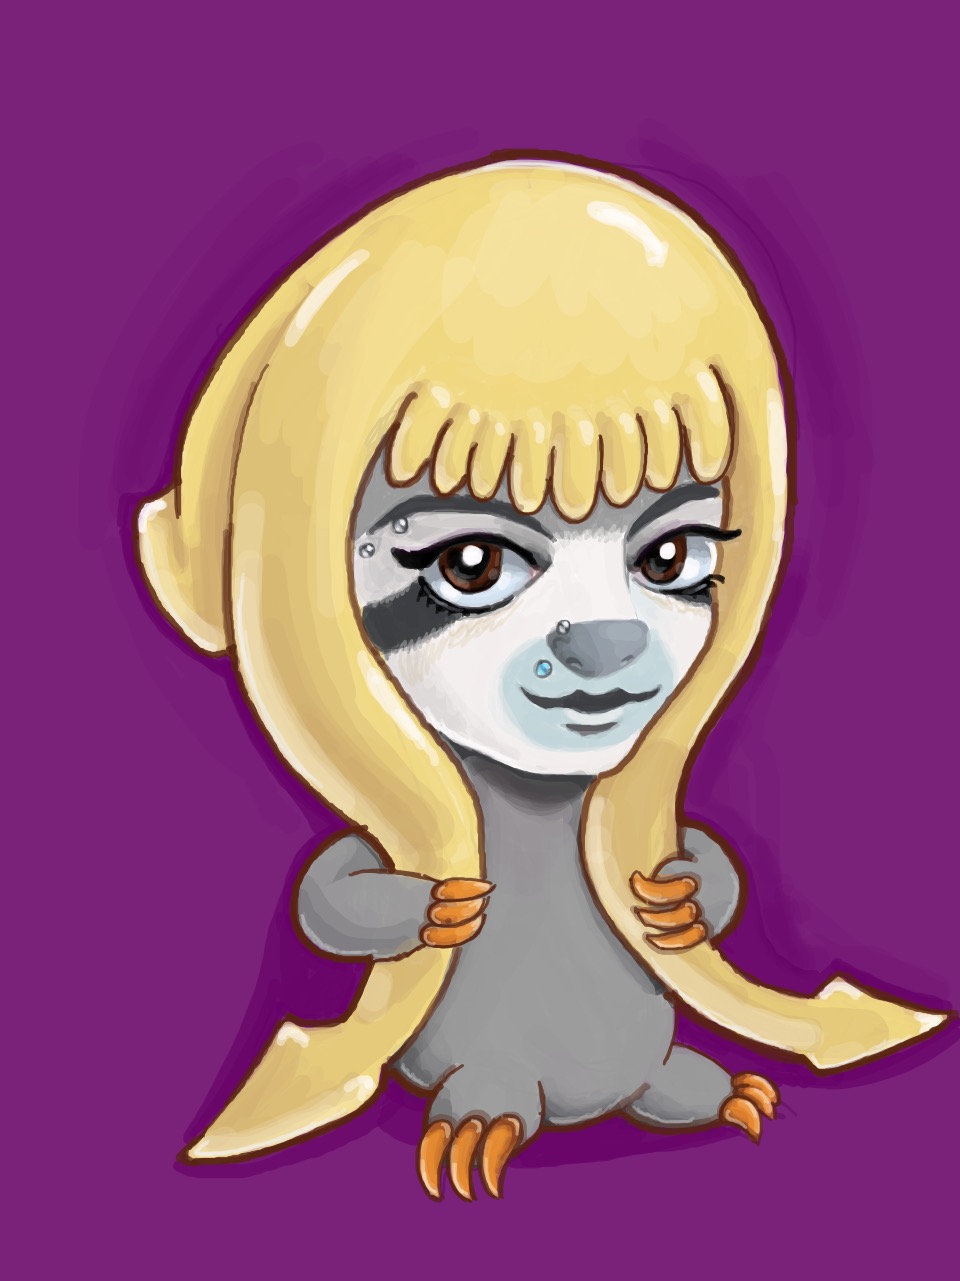 A chibi-style sloth with piercings, tentacles for hair, and a seductive look.